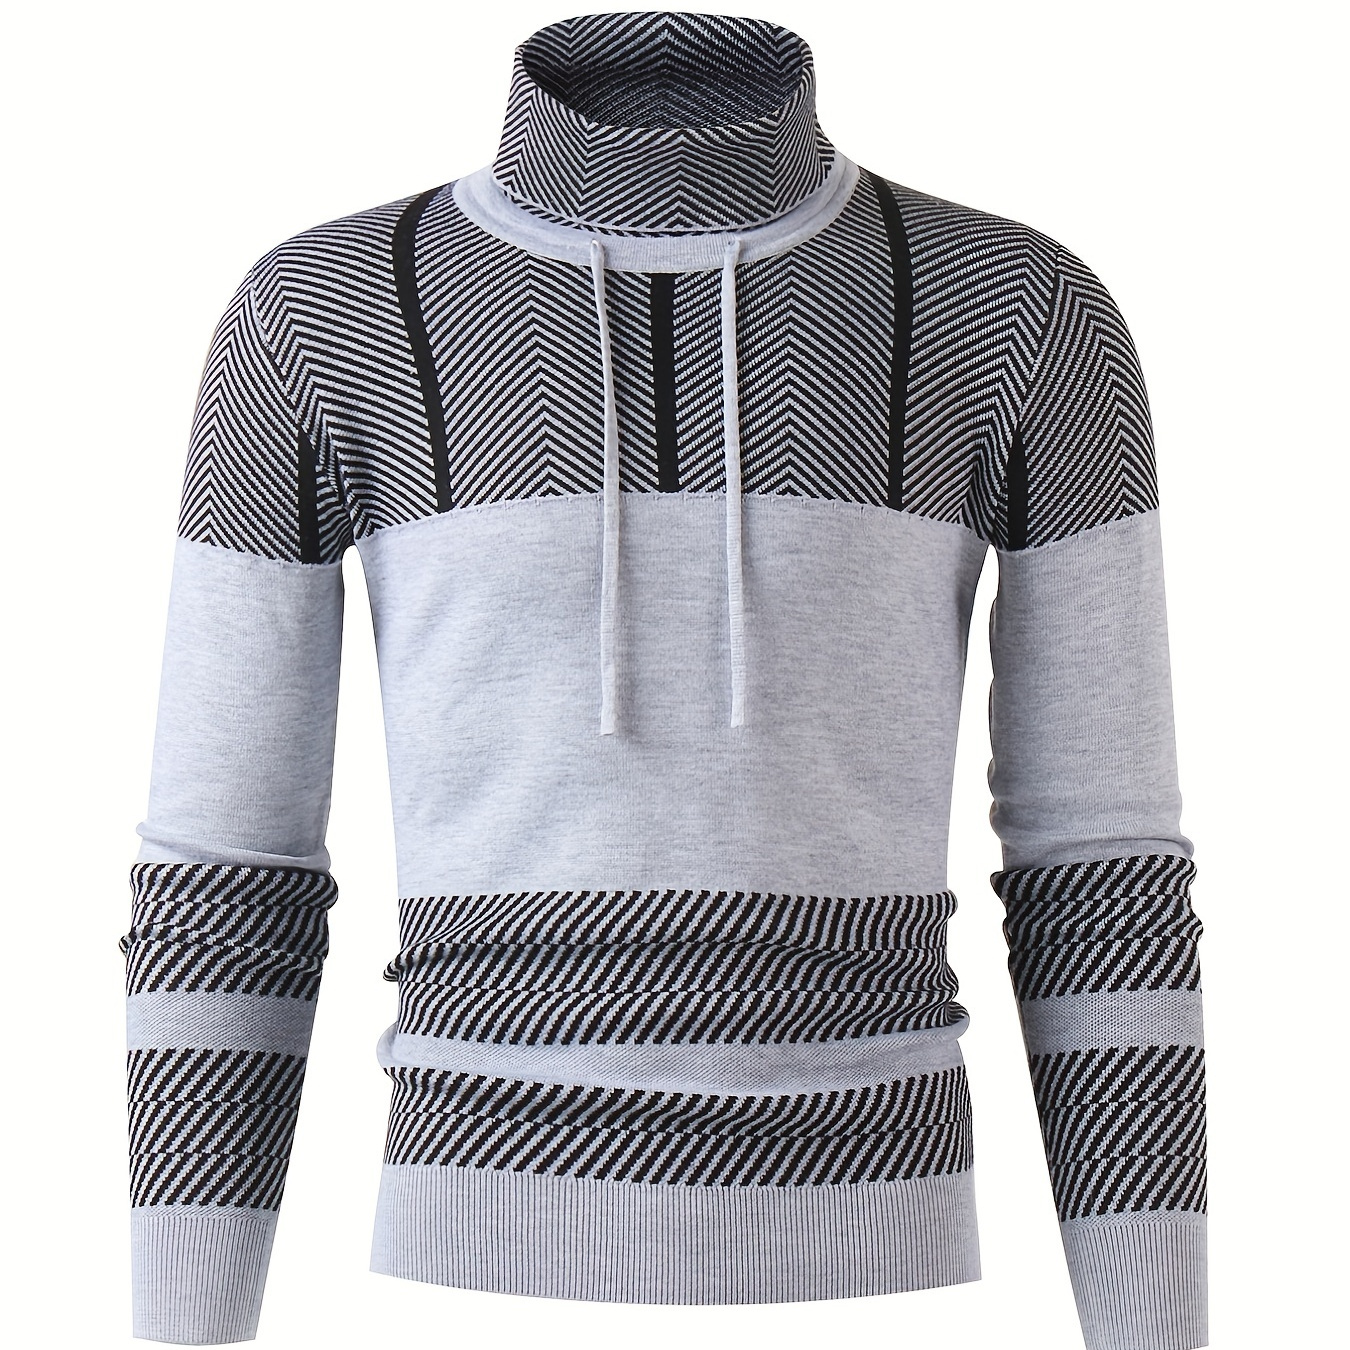 

Fashionable Men's Casual Suit, Contrast Colors, Striped Top, Long Sleeve Heaps Collar Knit Sweater, Suitable For Outdoor Sports And For Autumn And Winter, As Gift